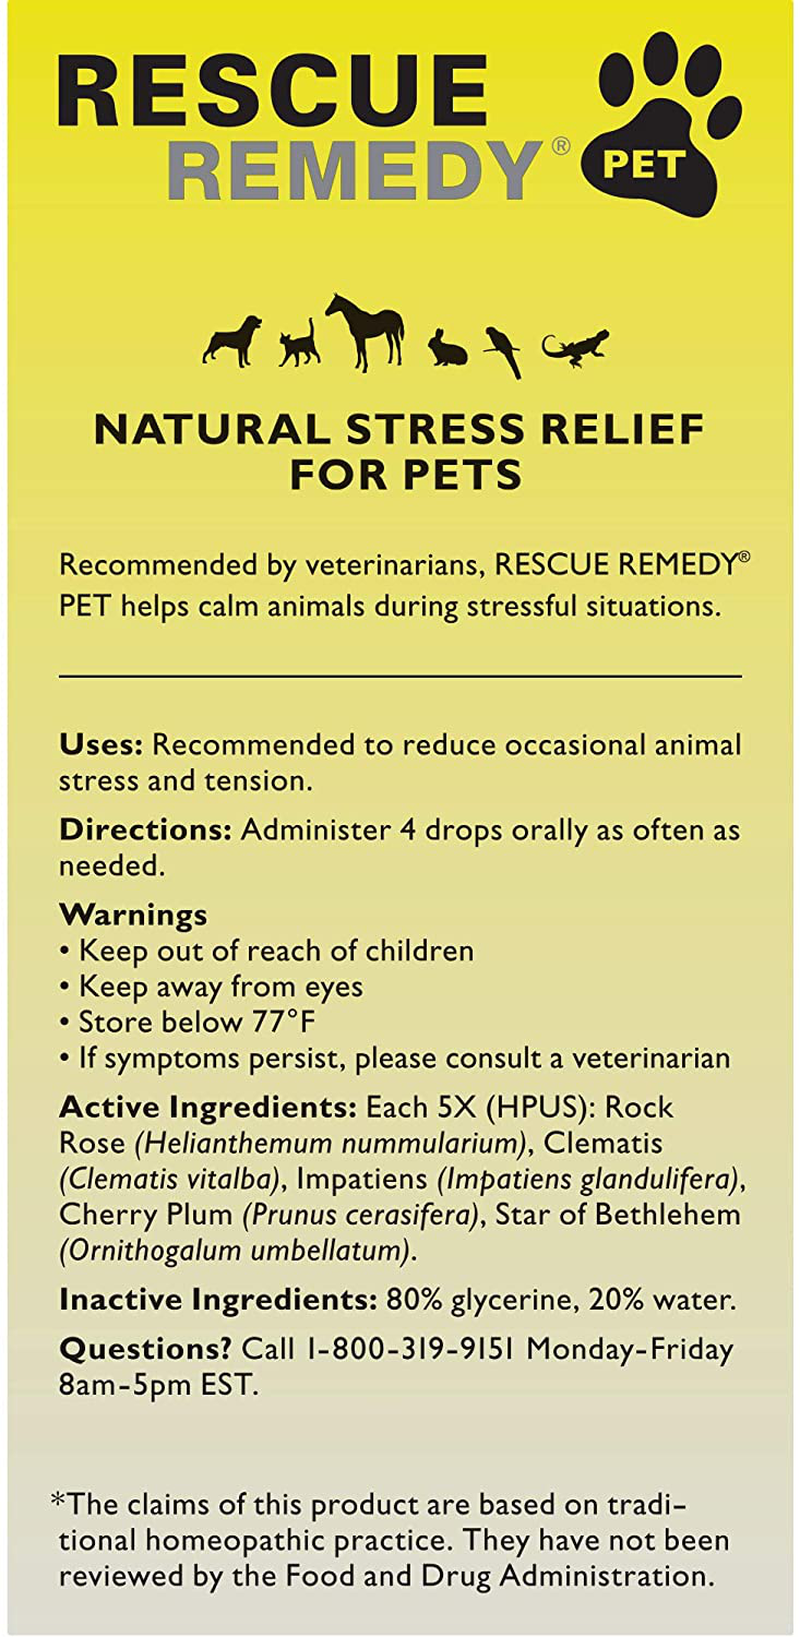 Bach RESCUE REMEDY PET Dropper 20Ml, Natural Stress and Occasional Anxiety Relief, Calming for Dogs, Cats, and Other Pets, Homeopathic Flower Remedy, Thunder, Fireworks and Travel, Sedative-Free